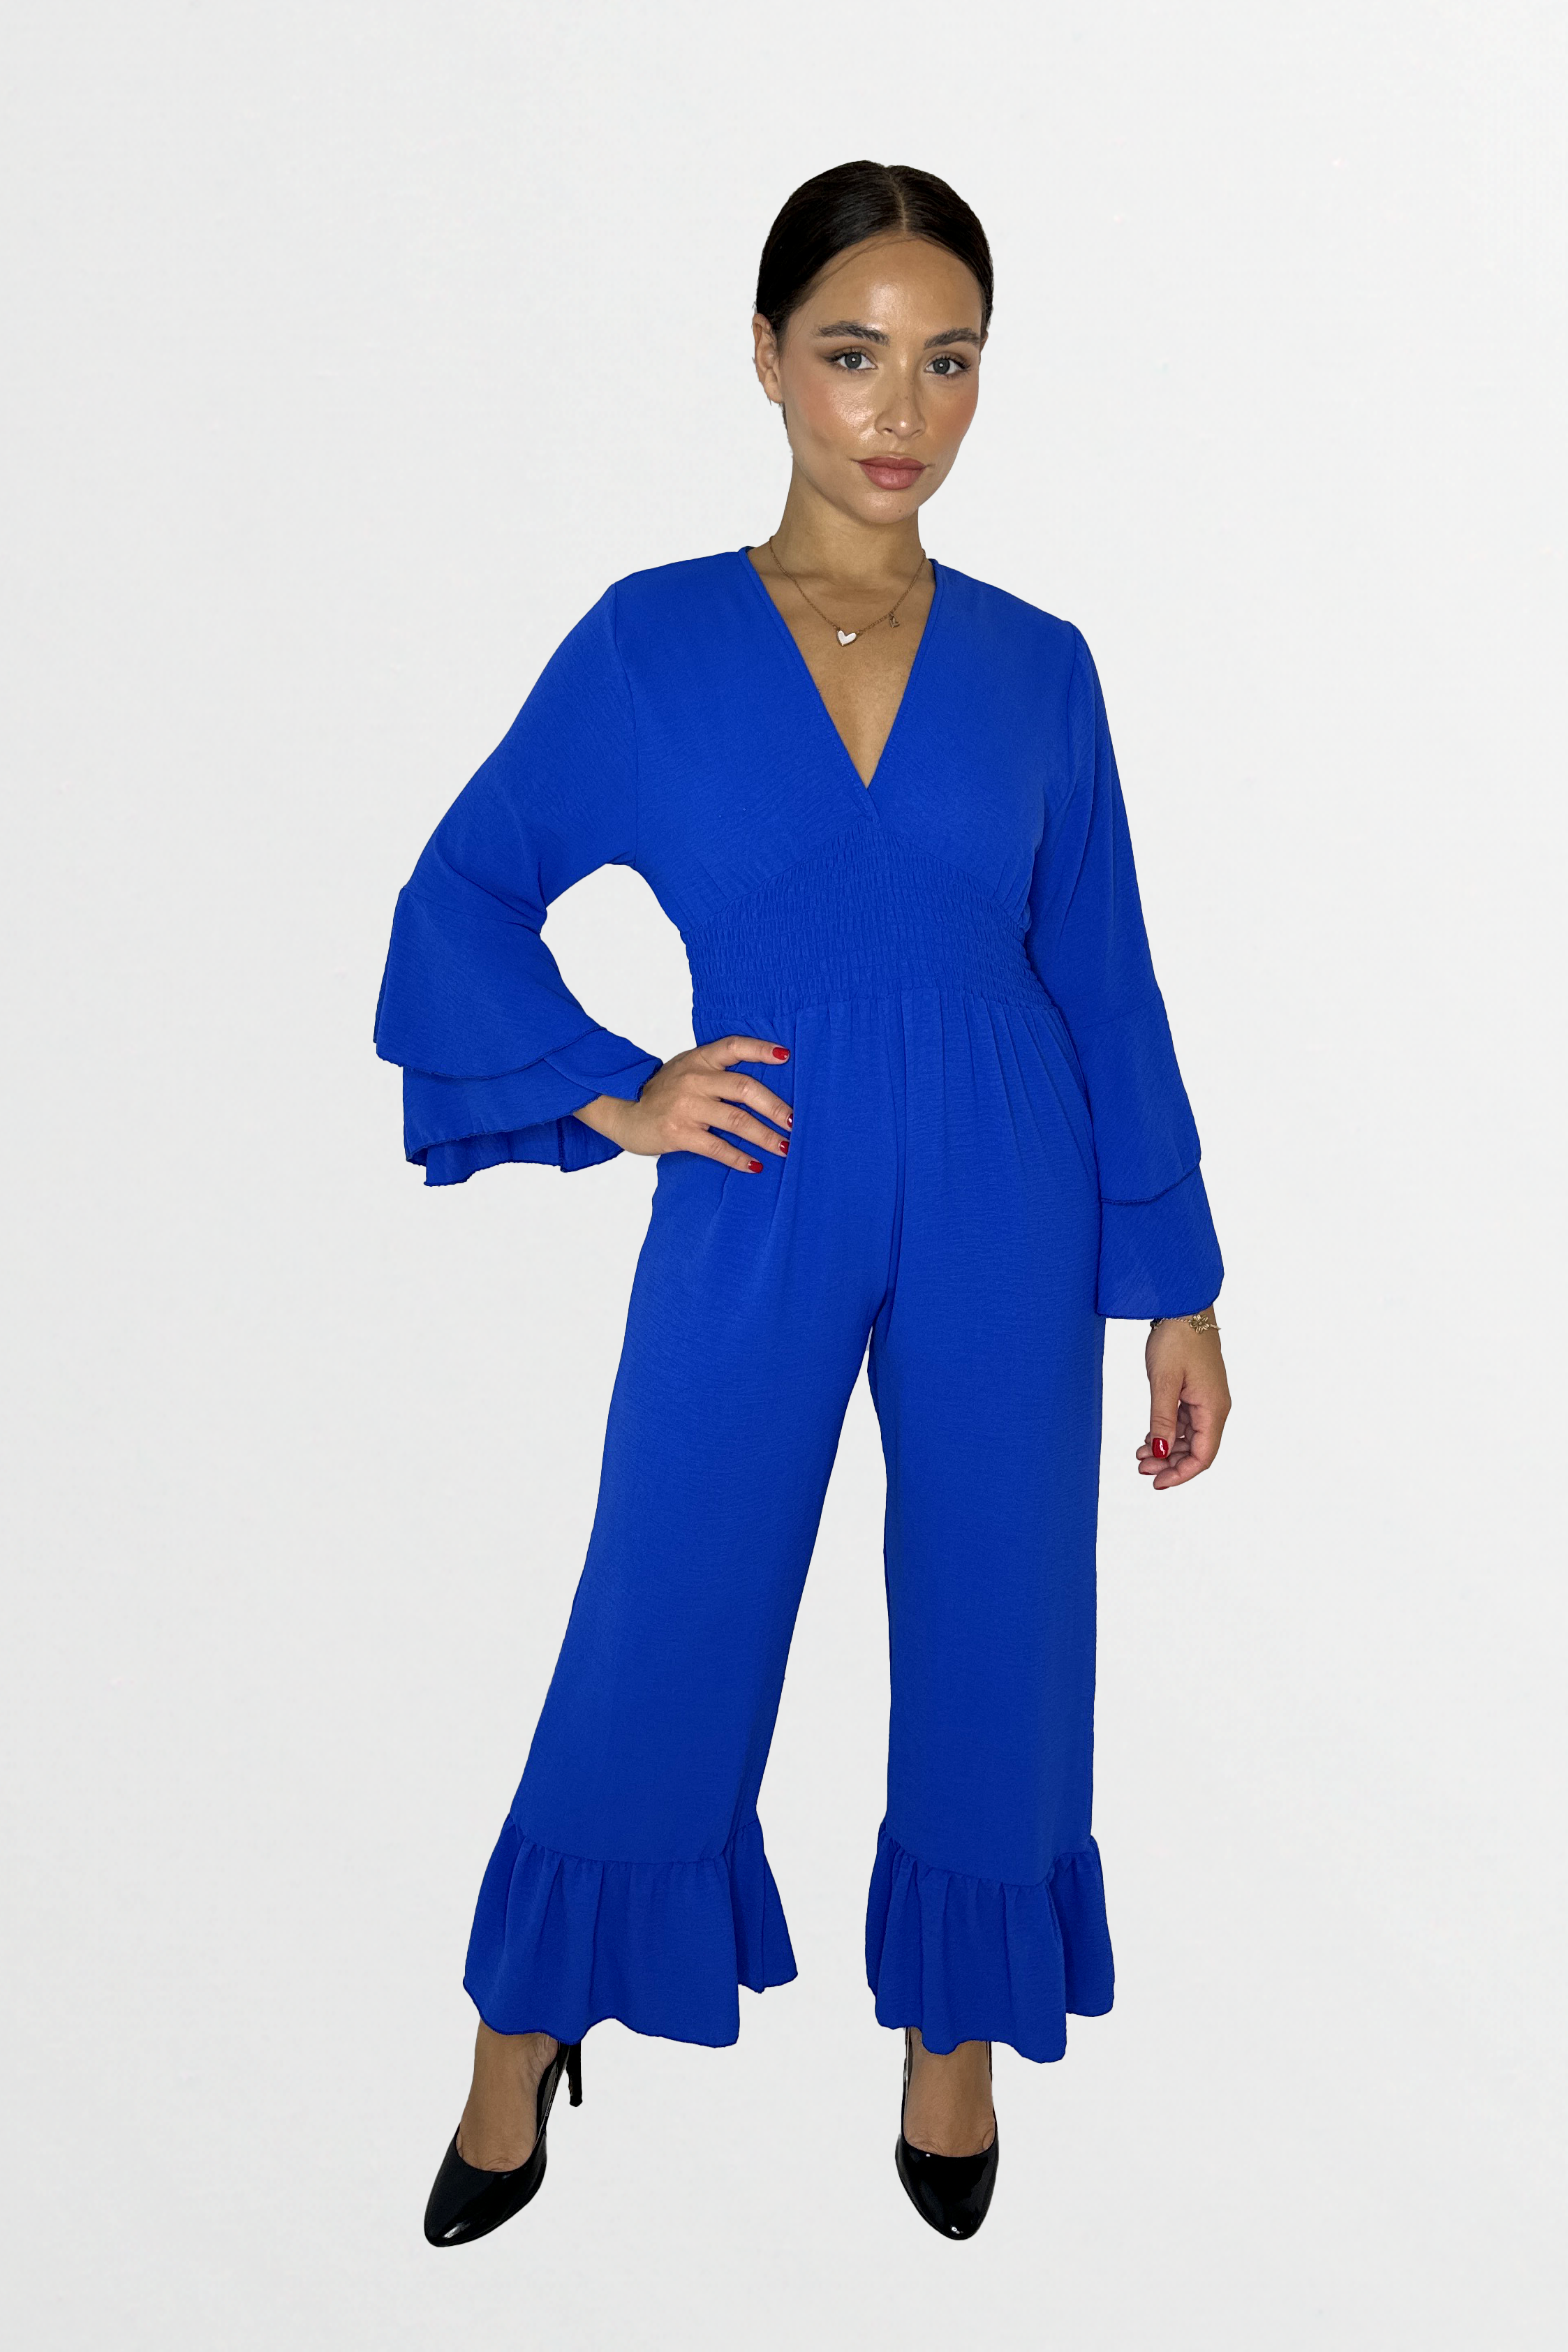 Low V-Cut Neck Bell Sleeve Cinched Waist Frill Wide Leg Petite Jumpsuit